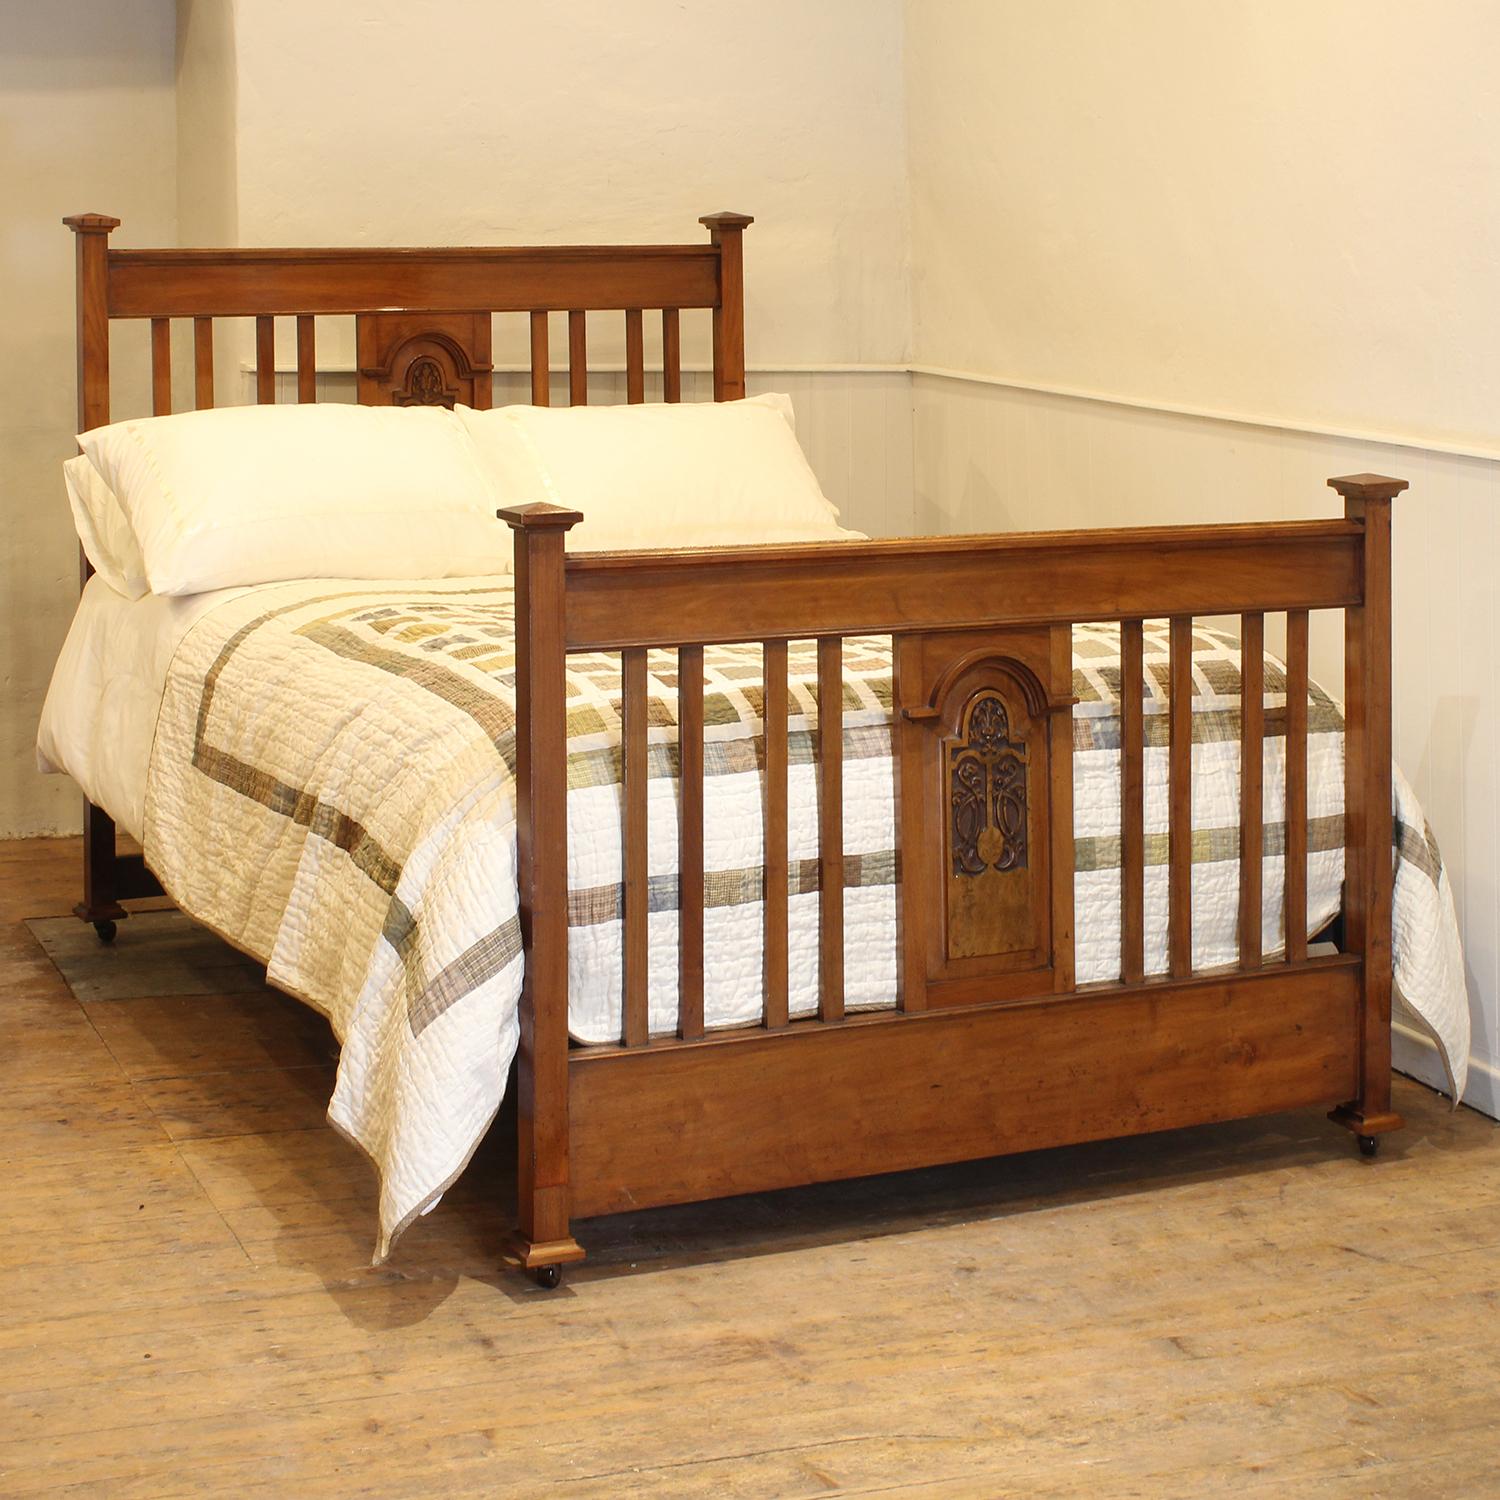 An Edwardian antique bed with pagoda caps and central carved motif.

This bed accepts a standard double, 4ft 6in (54 in), base and mattress set.

The price is for the bed frame and a firm bed base. 

The mattress, sprung bed base, bedding and linen